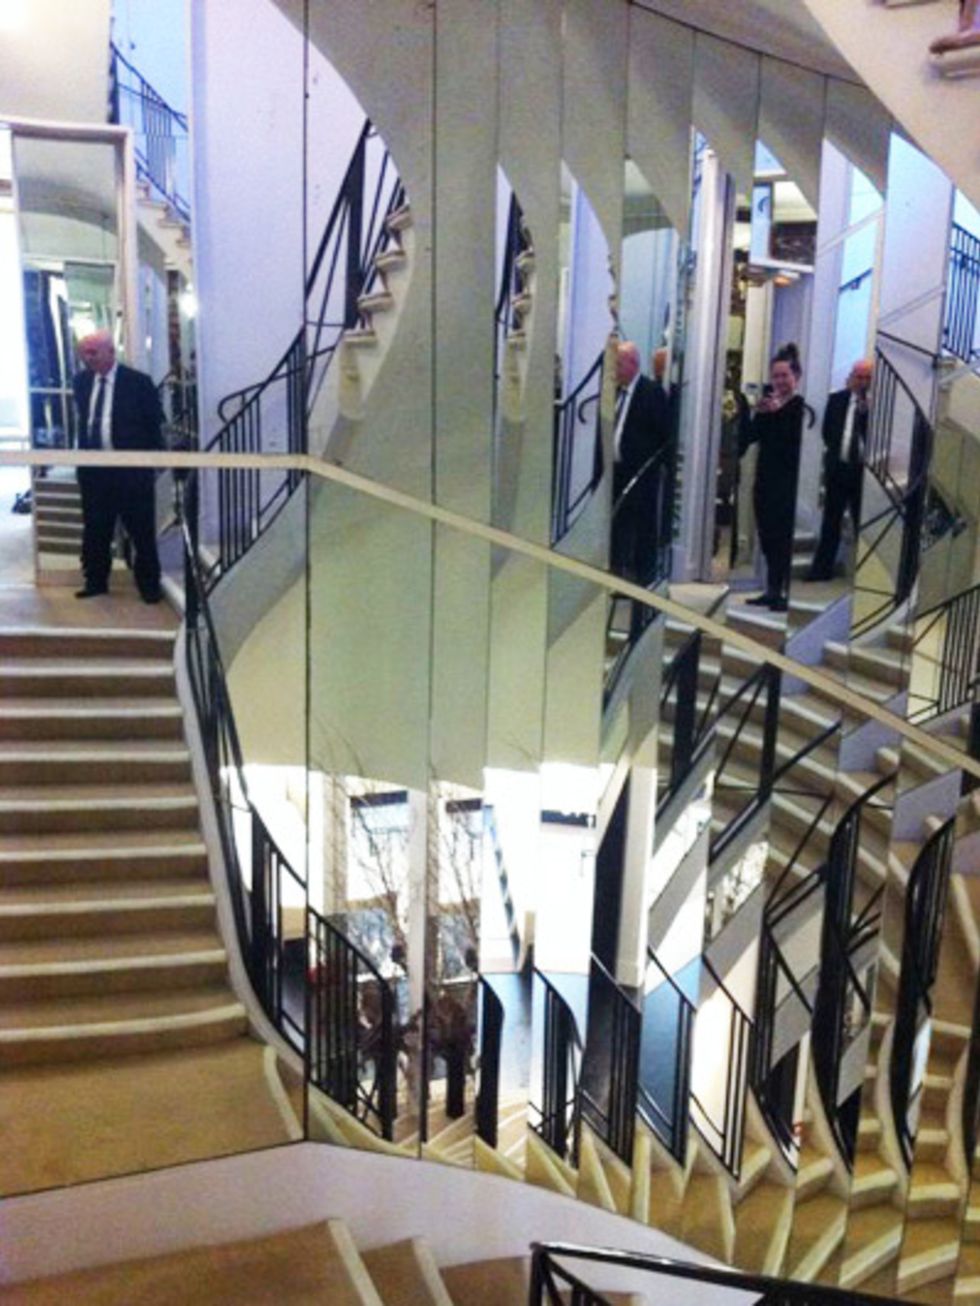 Stairs, Handrail, Cleanliness, Lobby, Shopping mall, 